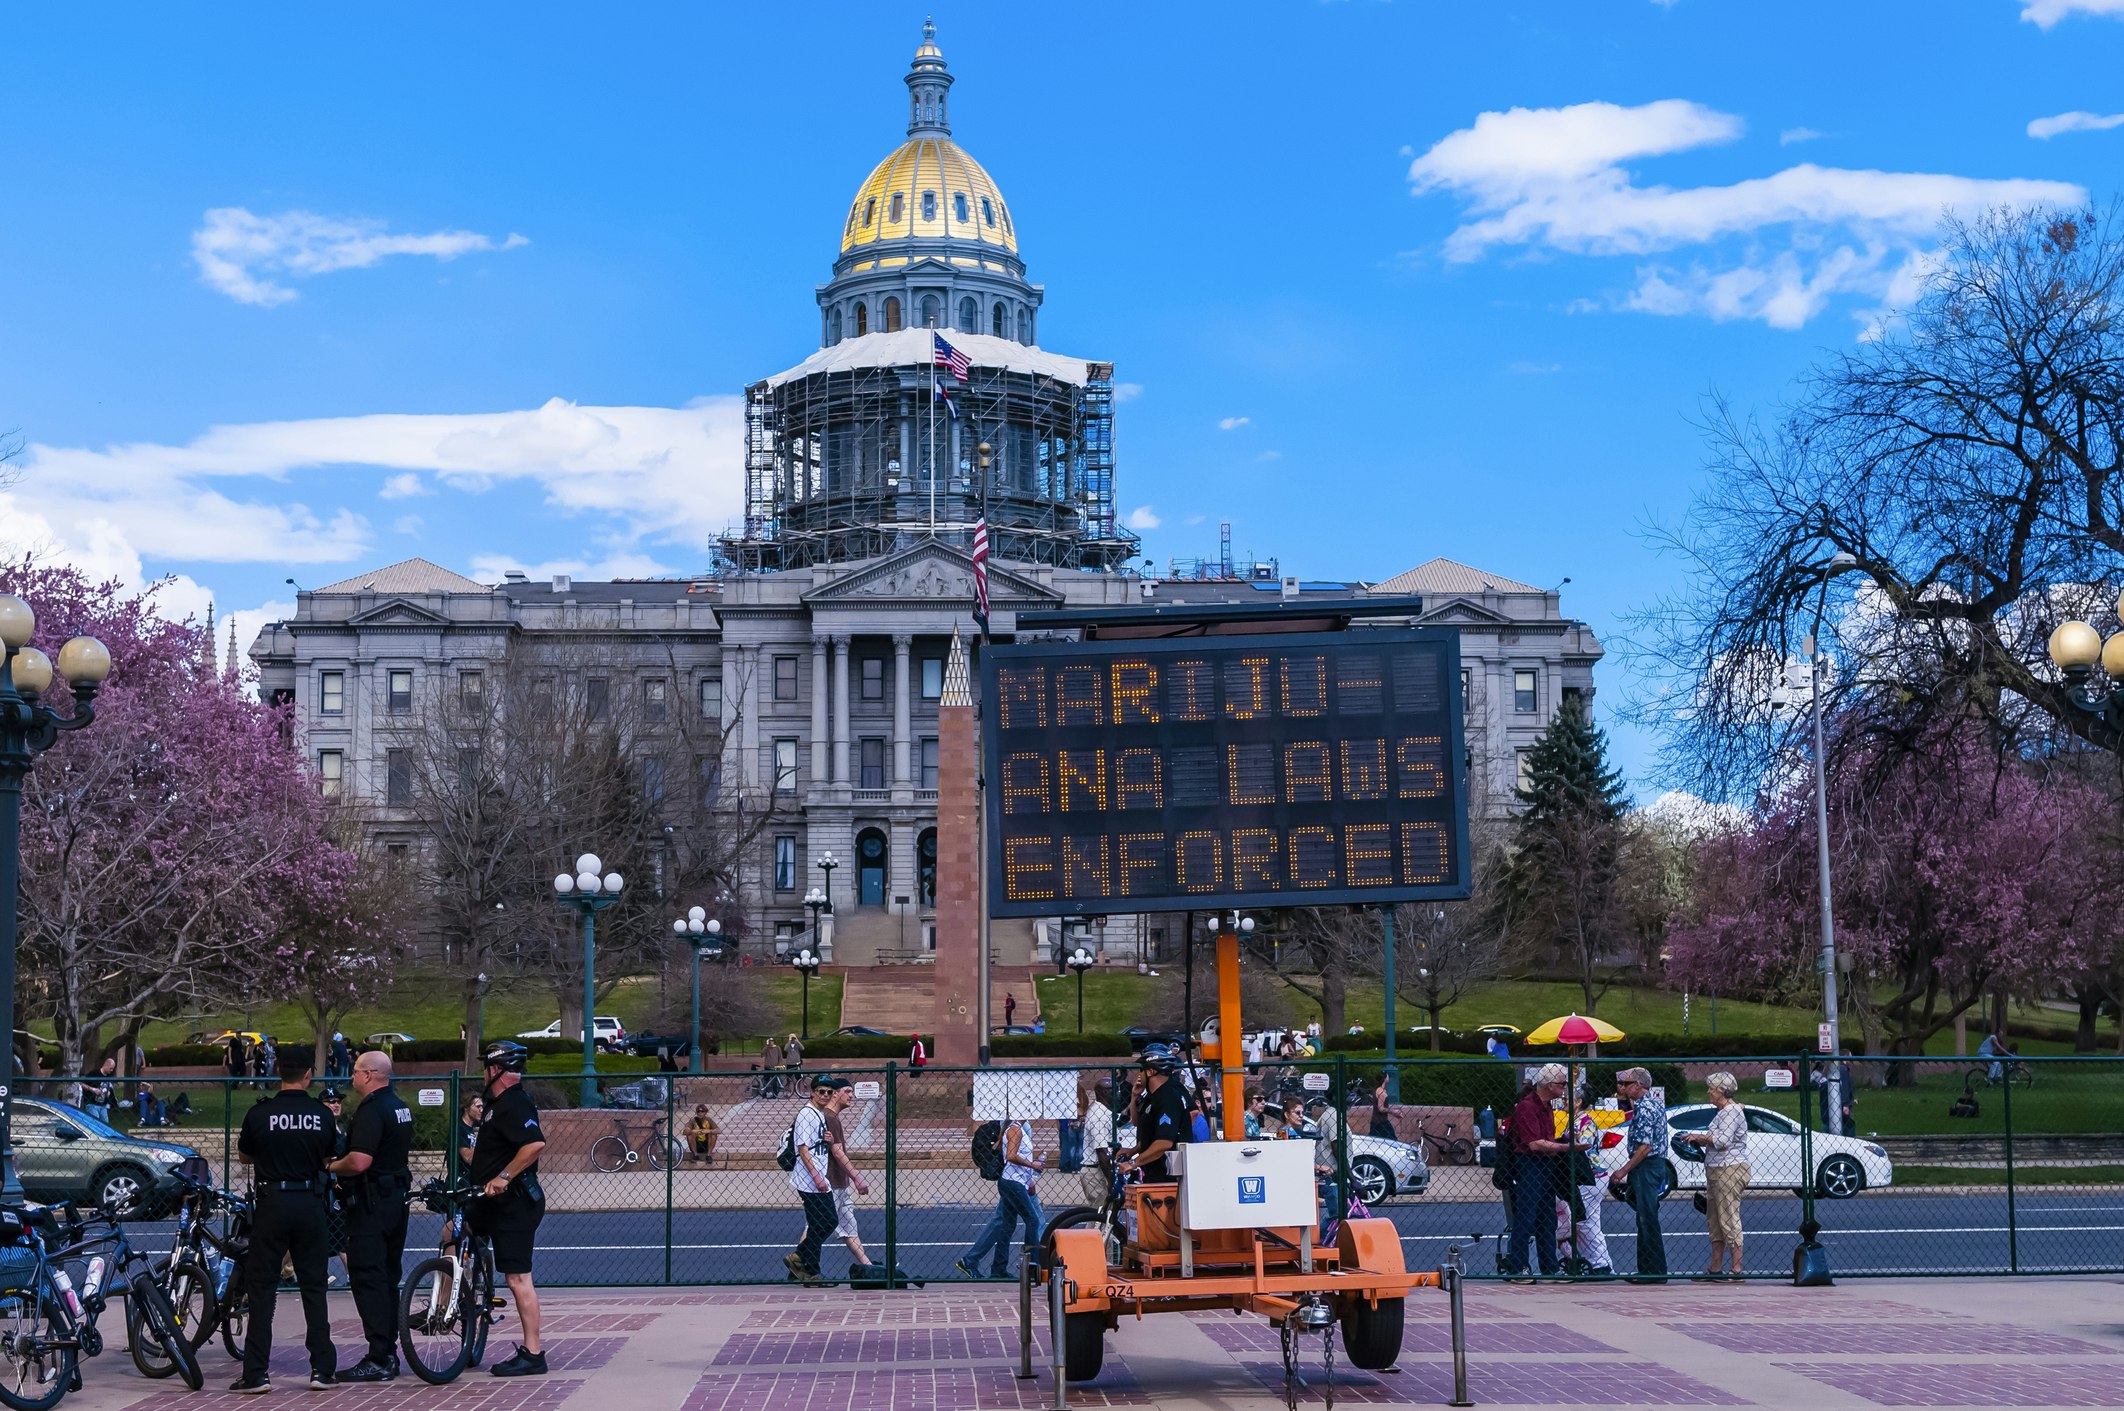 Three bicycle cops stand near an electronic billboard reading "Marijuana Laws Enforced" in front of the Colorado State Capitol Building in Civic Center Park in Denver. The trees are covered in purple spring blooms that mirror the reddish color of the paved sidewalk. 